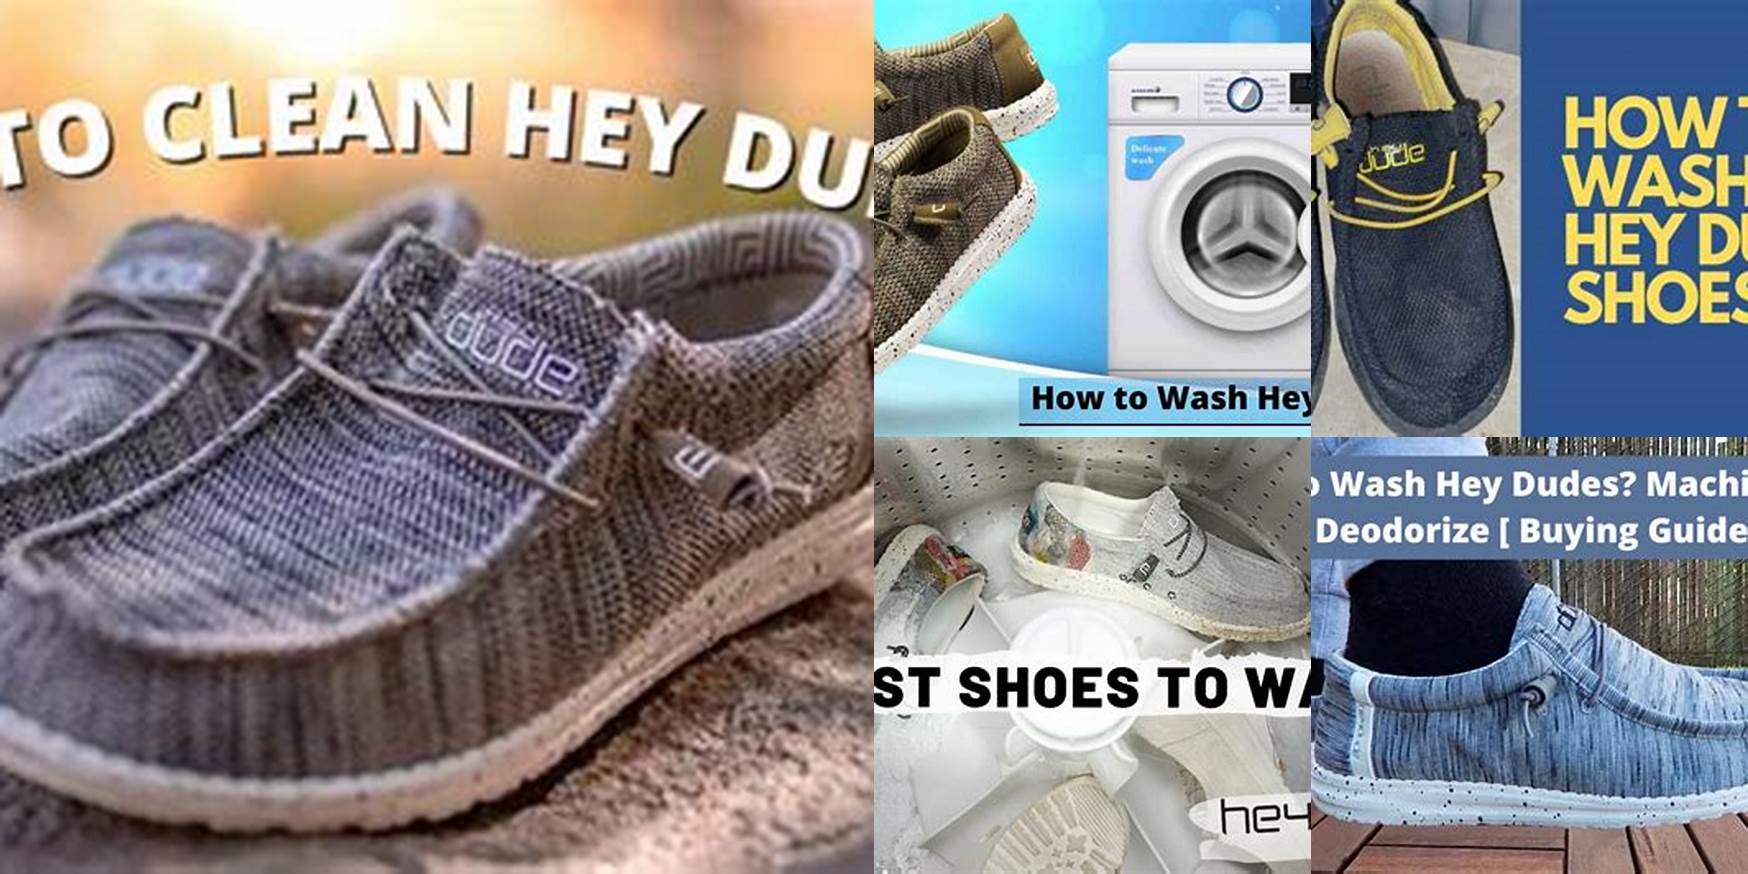 Can You Wash Hey Dudes With Clothes